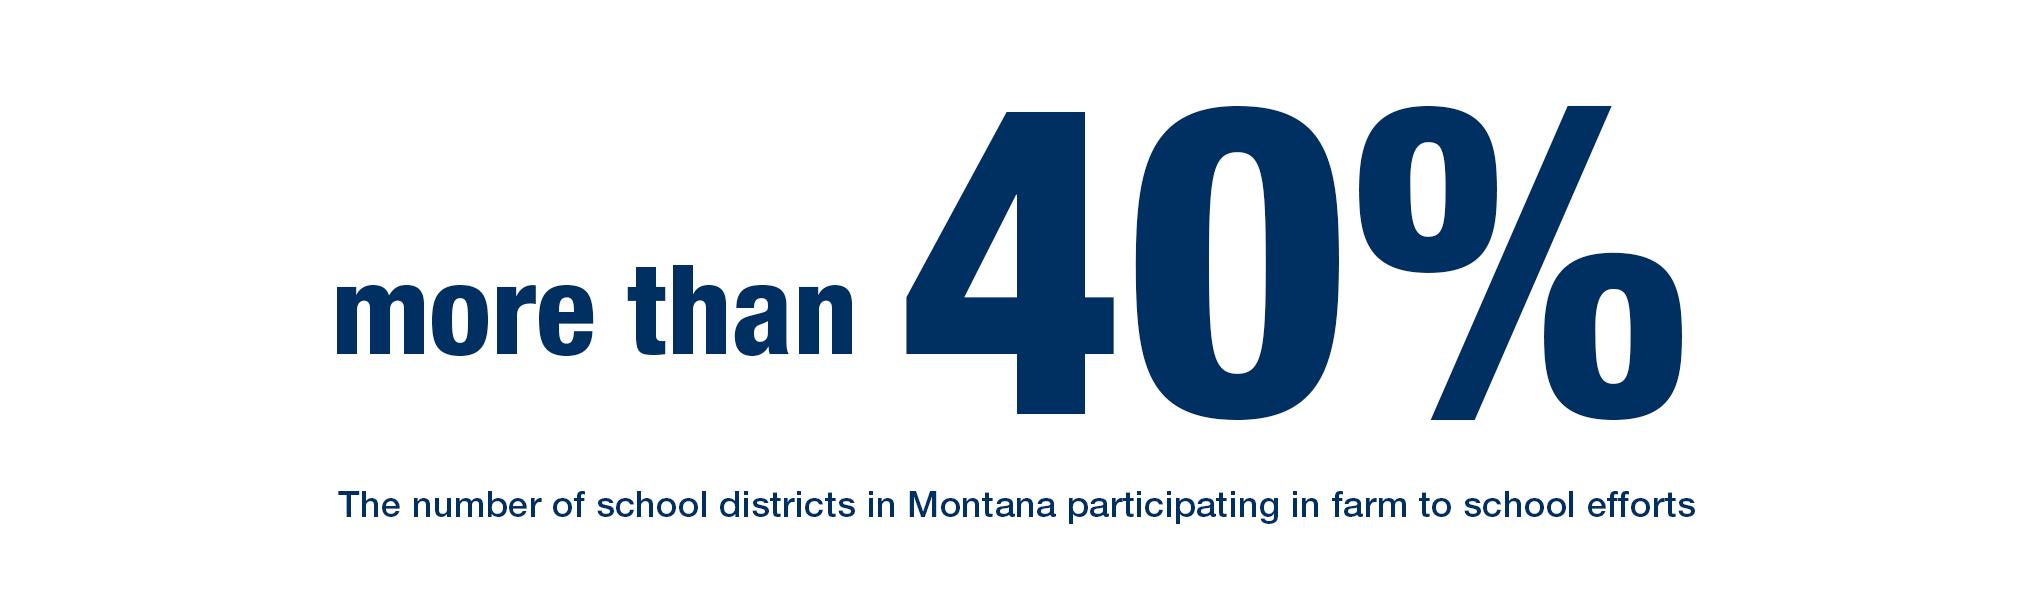 More than 40% of Montana schools are participating in farm to school efforts